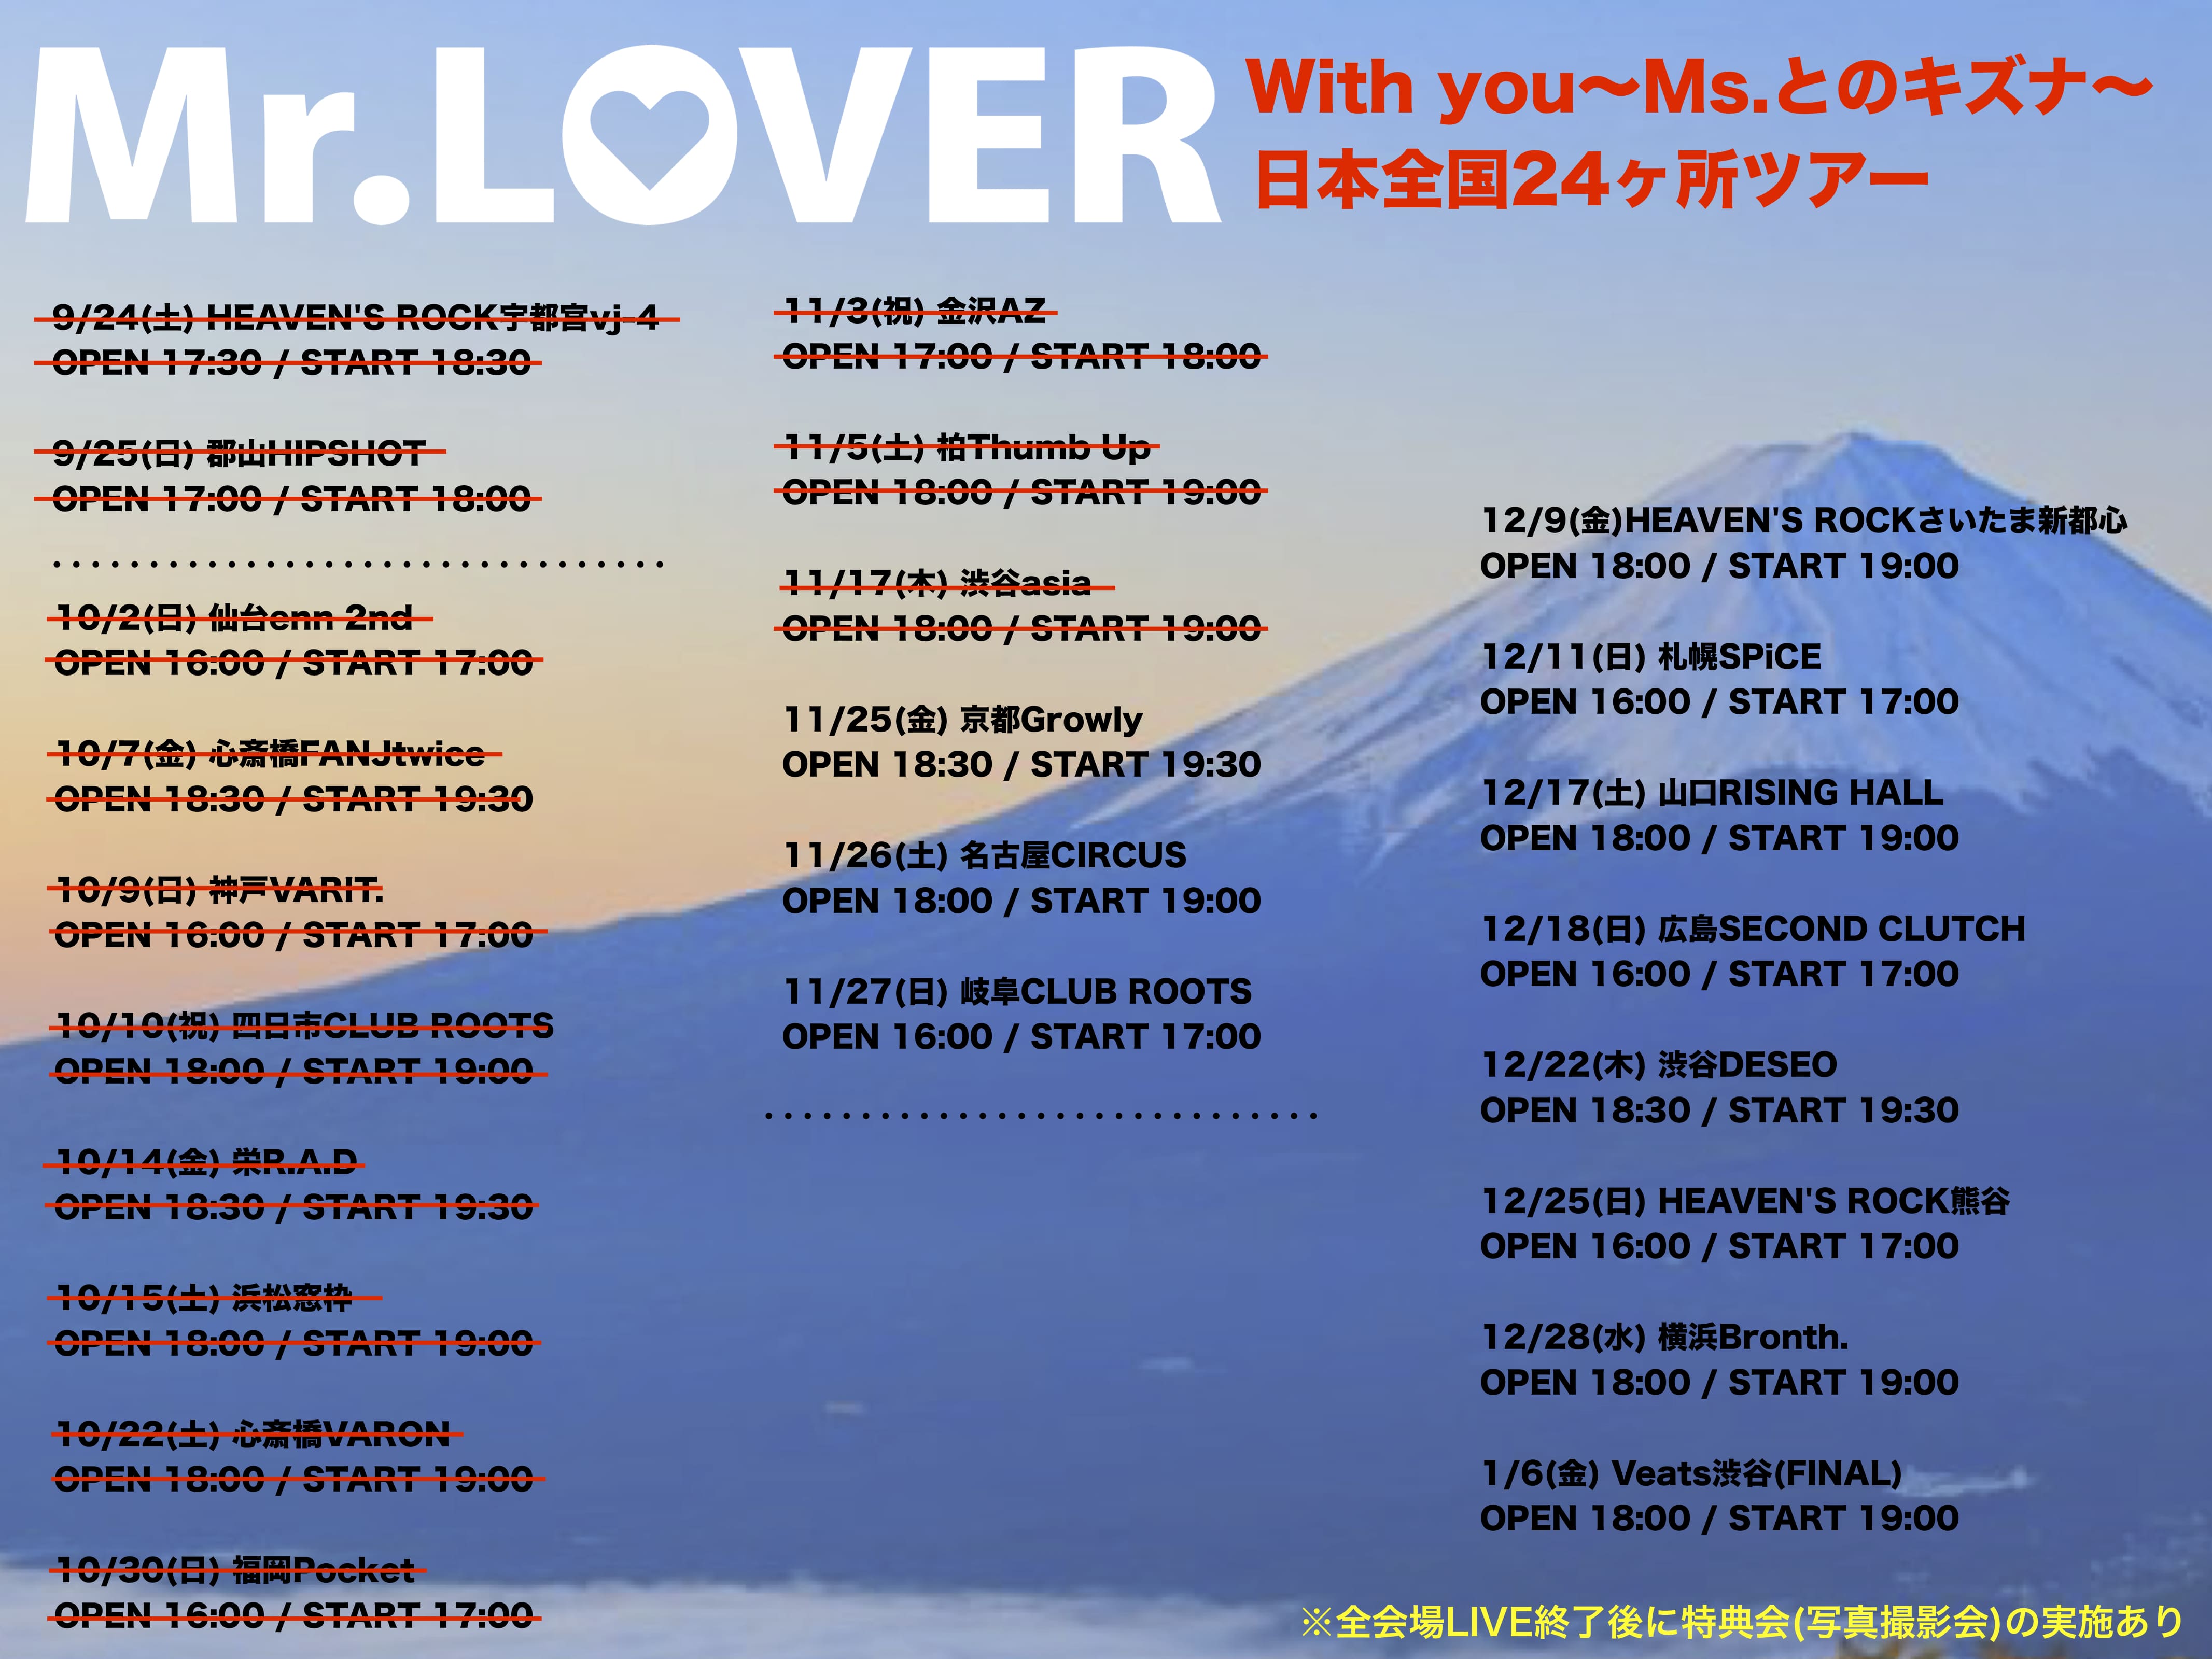 Mr.LOVER全国24ヶ所ツアー「With you〜Ms.とのキズナ」神奈川公演